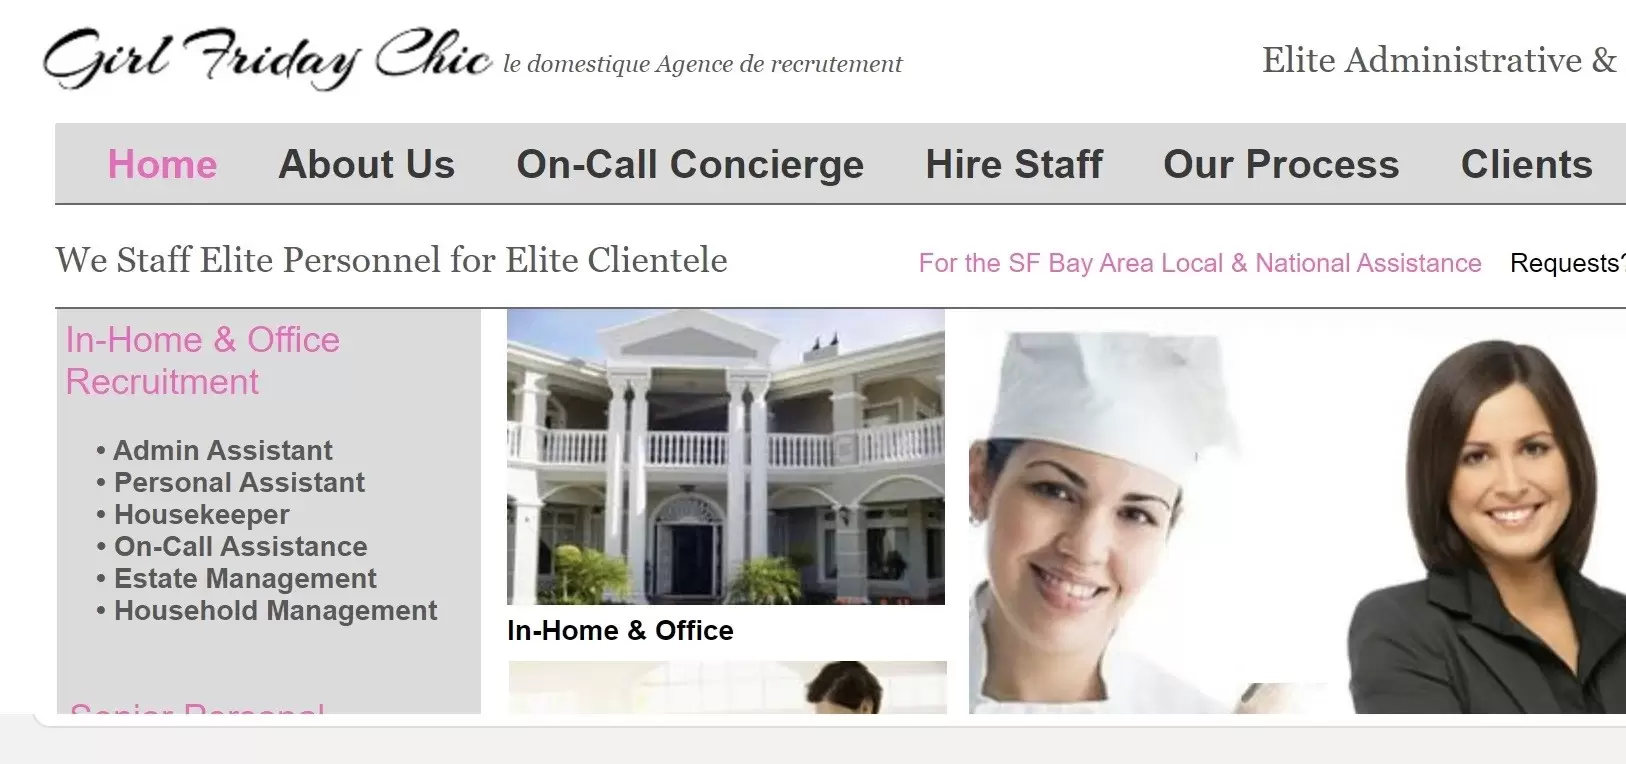 Girl Friday Chic domestic staffing